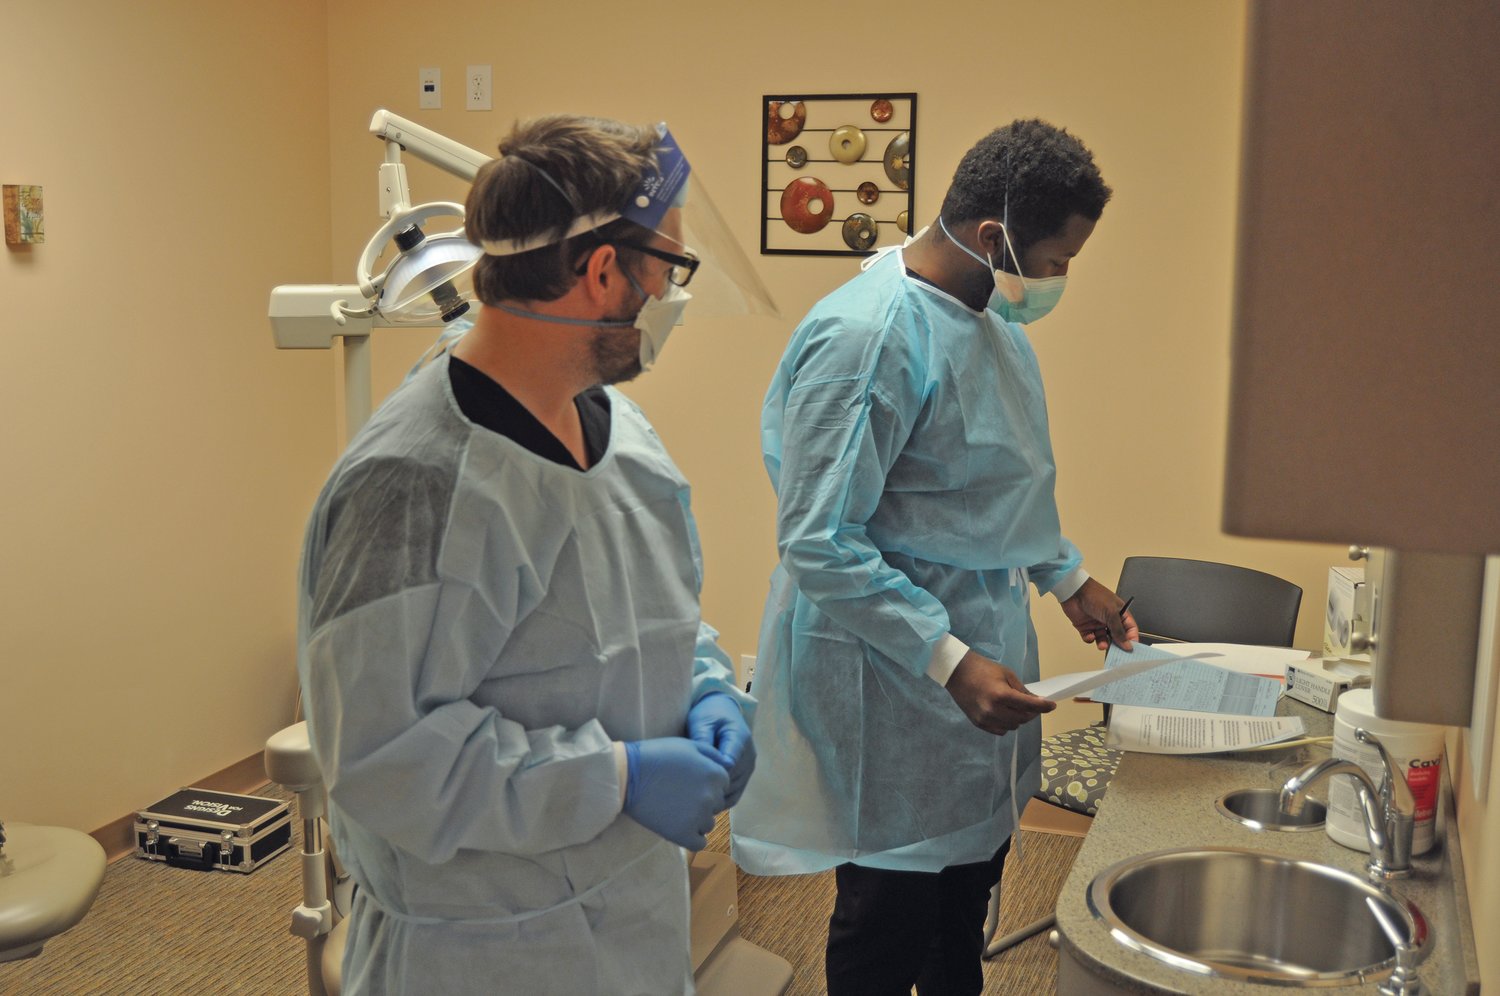 Dental students Phillip Lane, right, and Richard Gunnell prepare for the next patient at the Dr. Mary Ludwig Montgomery County Free Clinic on Saturday. The dental school in Indianapolis has partnered with the clinic to treat urgent dental needs.